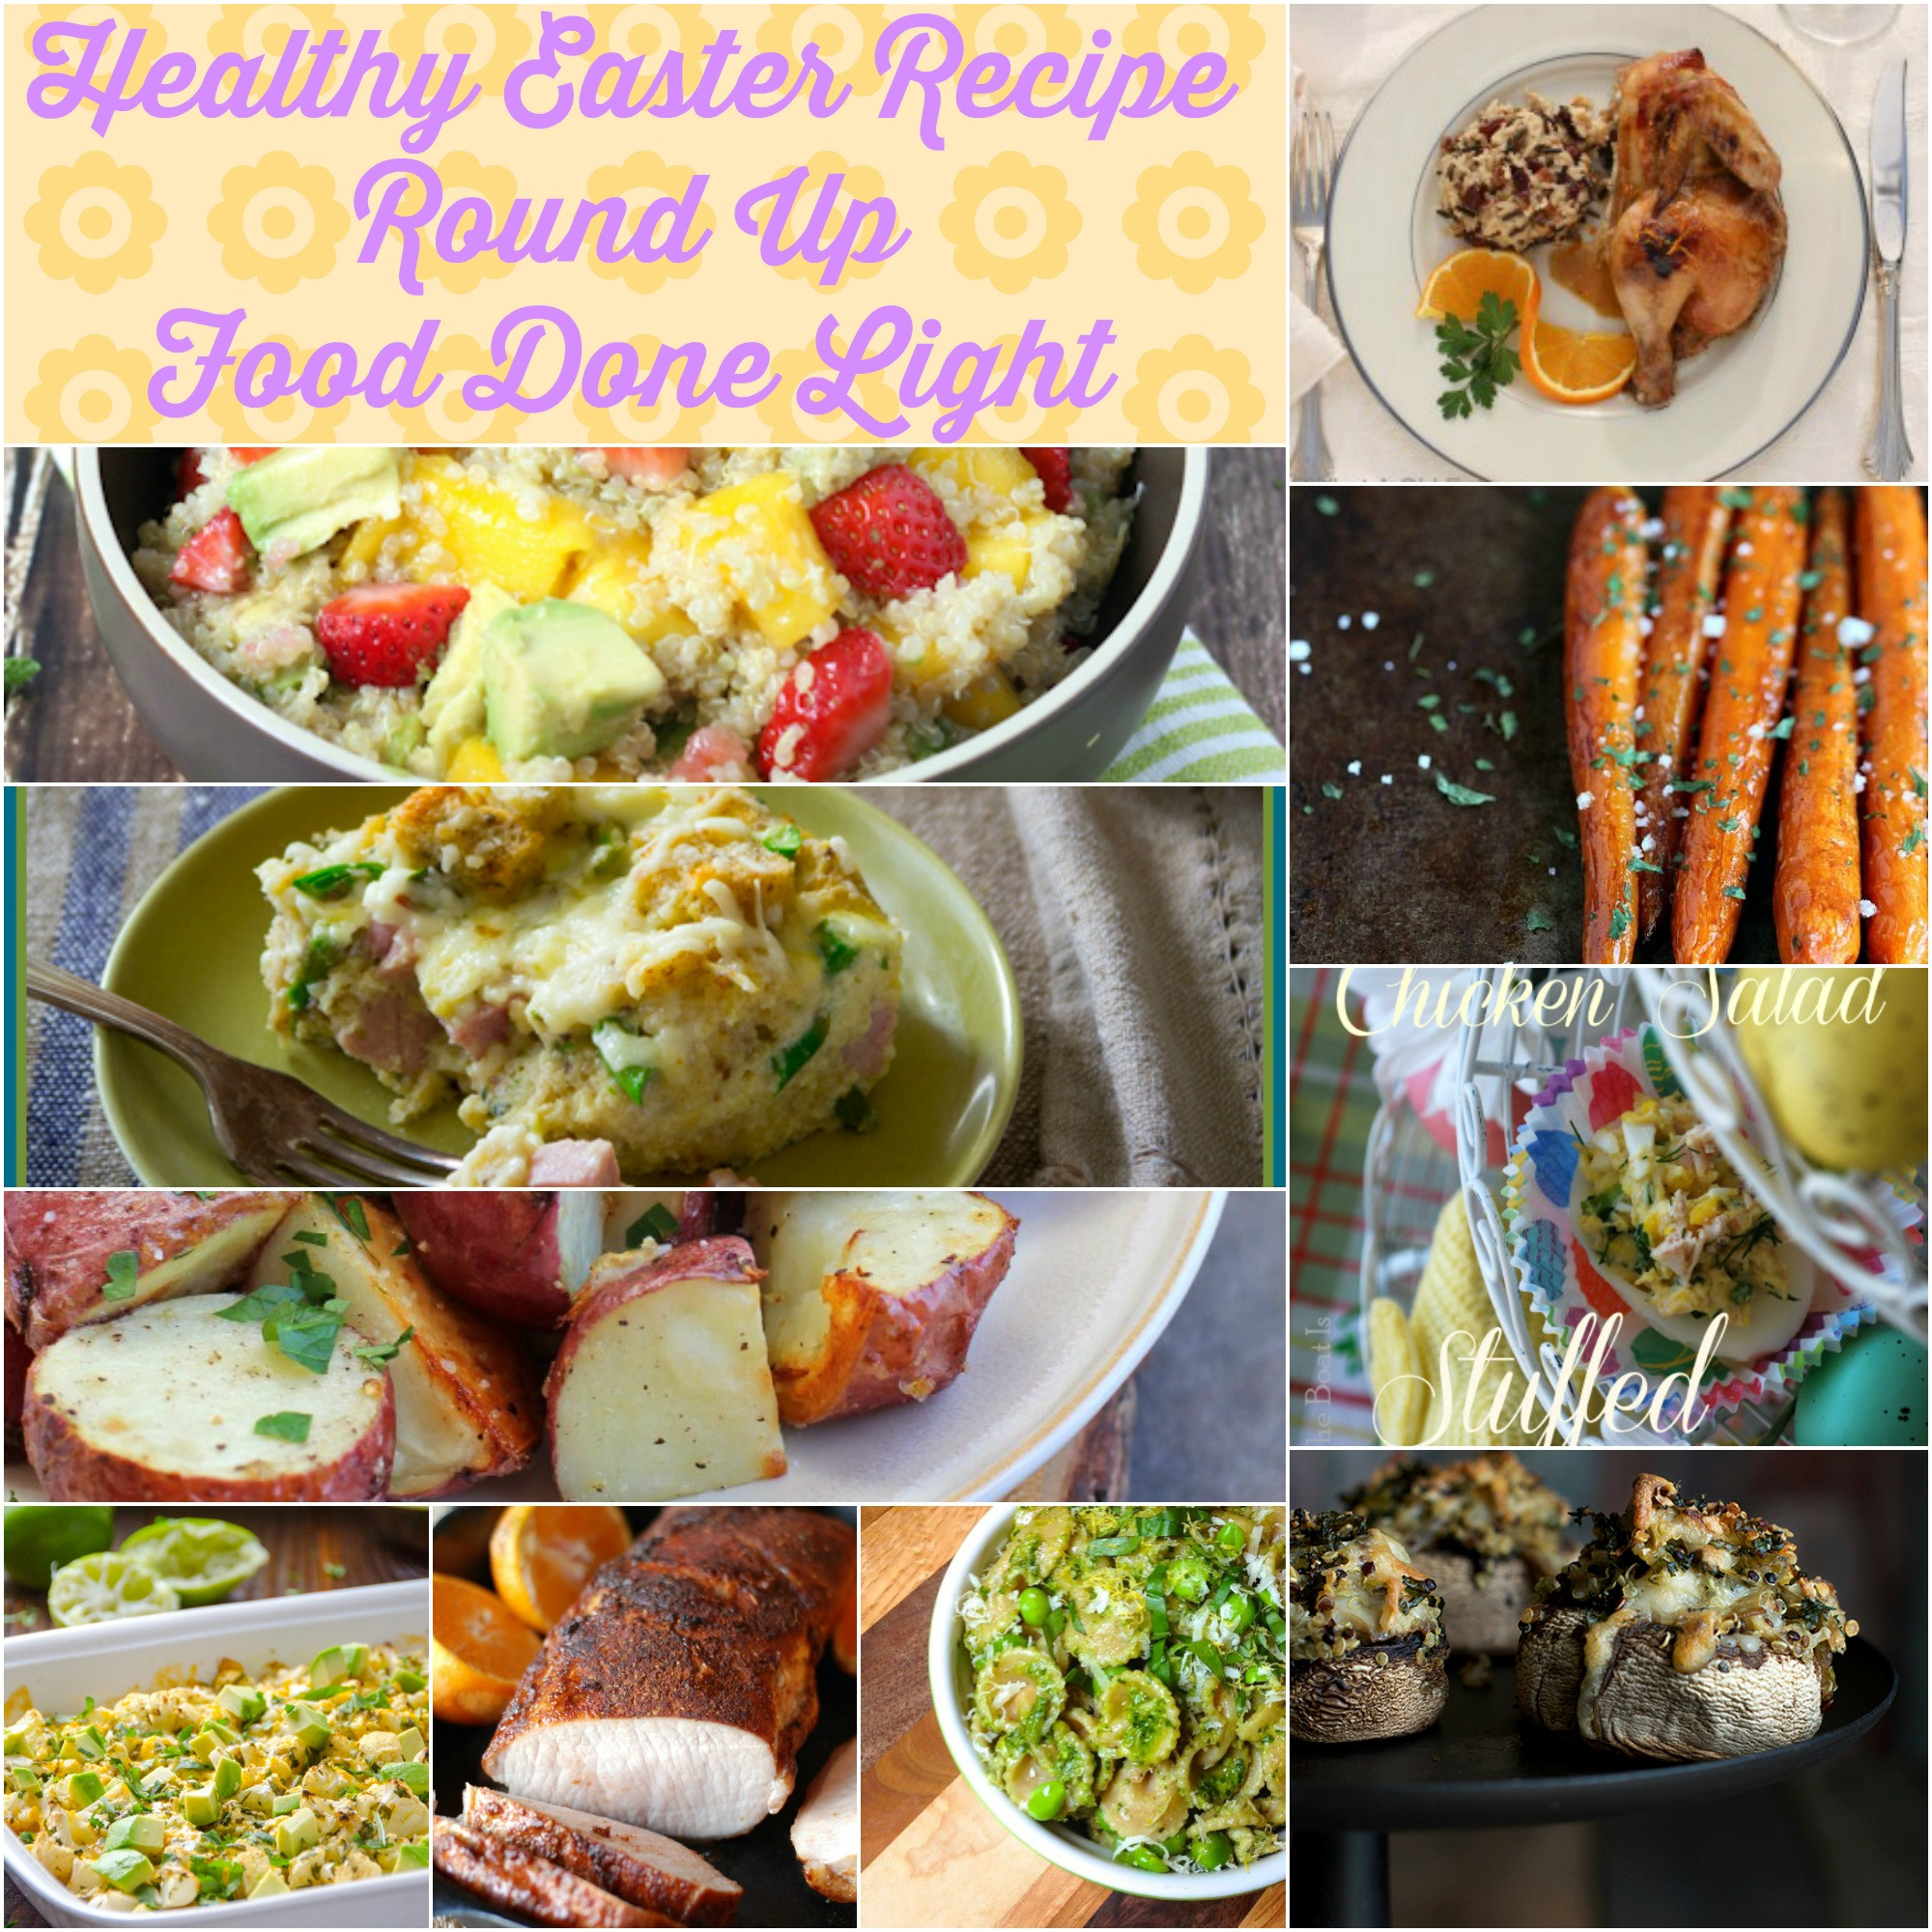 Recipe For Easter Dinner
 Healthy Easter Brunch Recipe Round Up Food Done Light